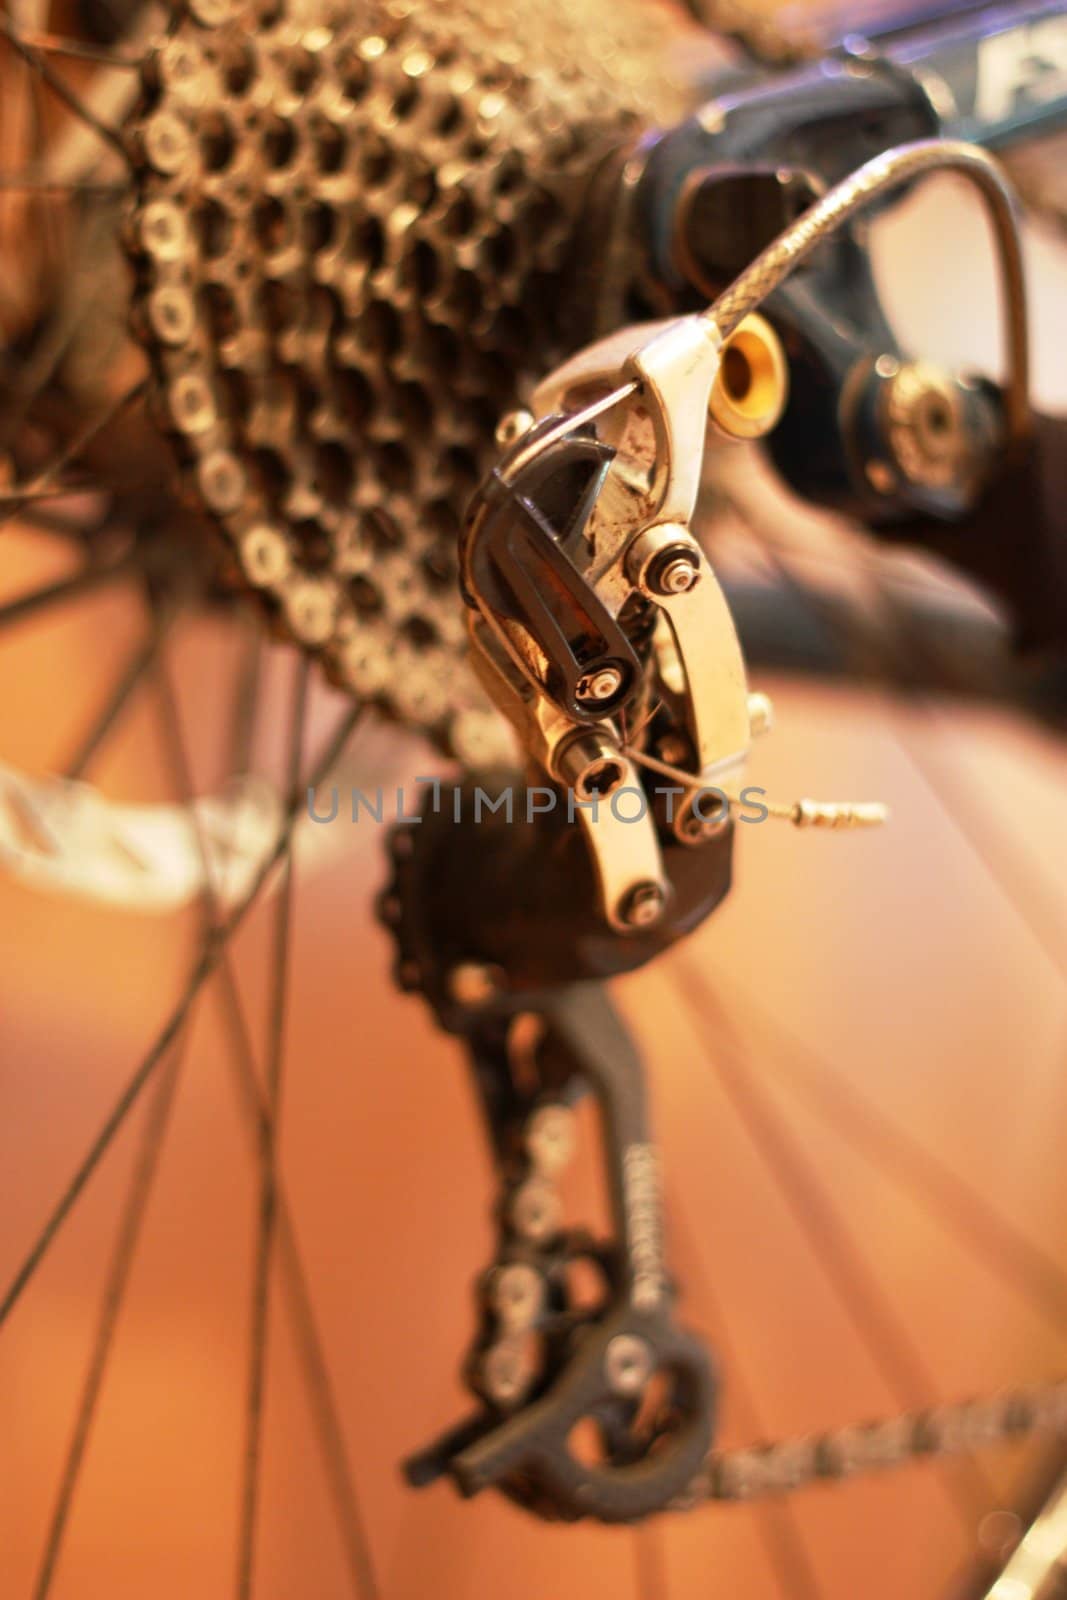 Bicycle Gears by chrisga